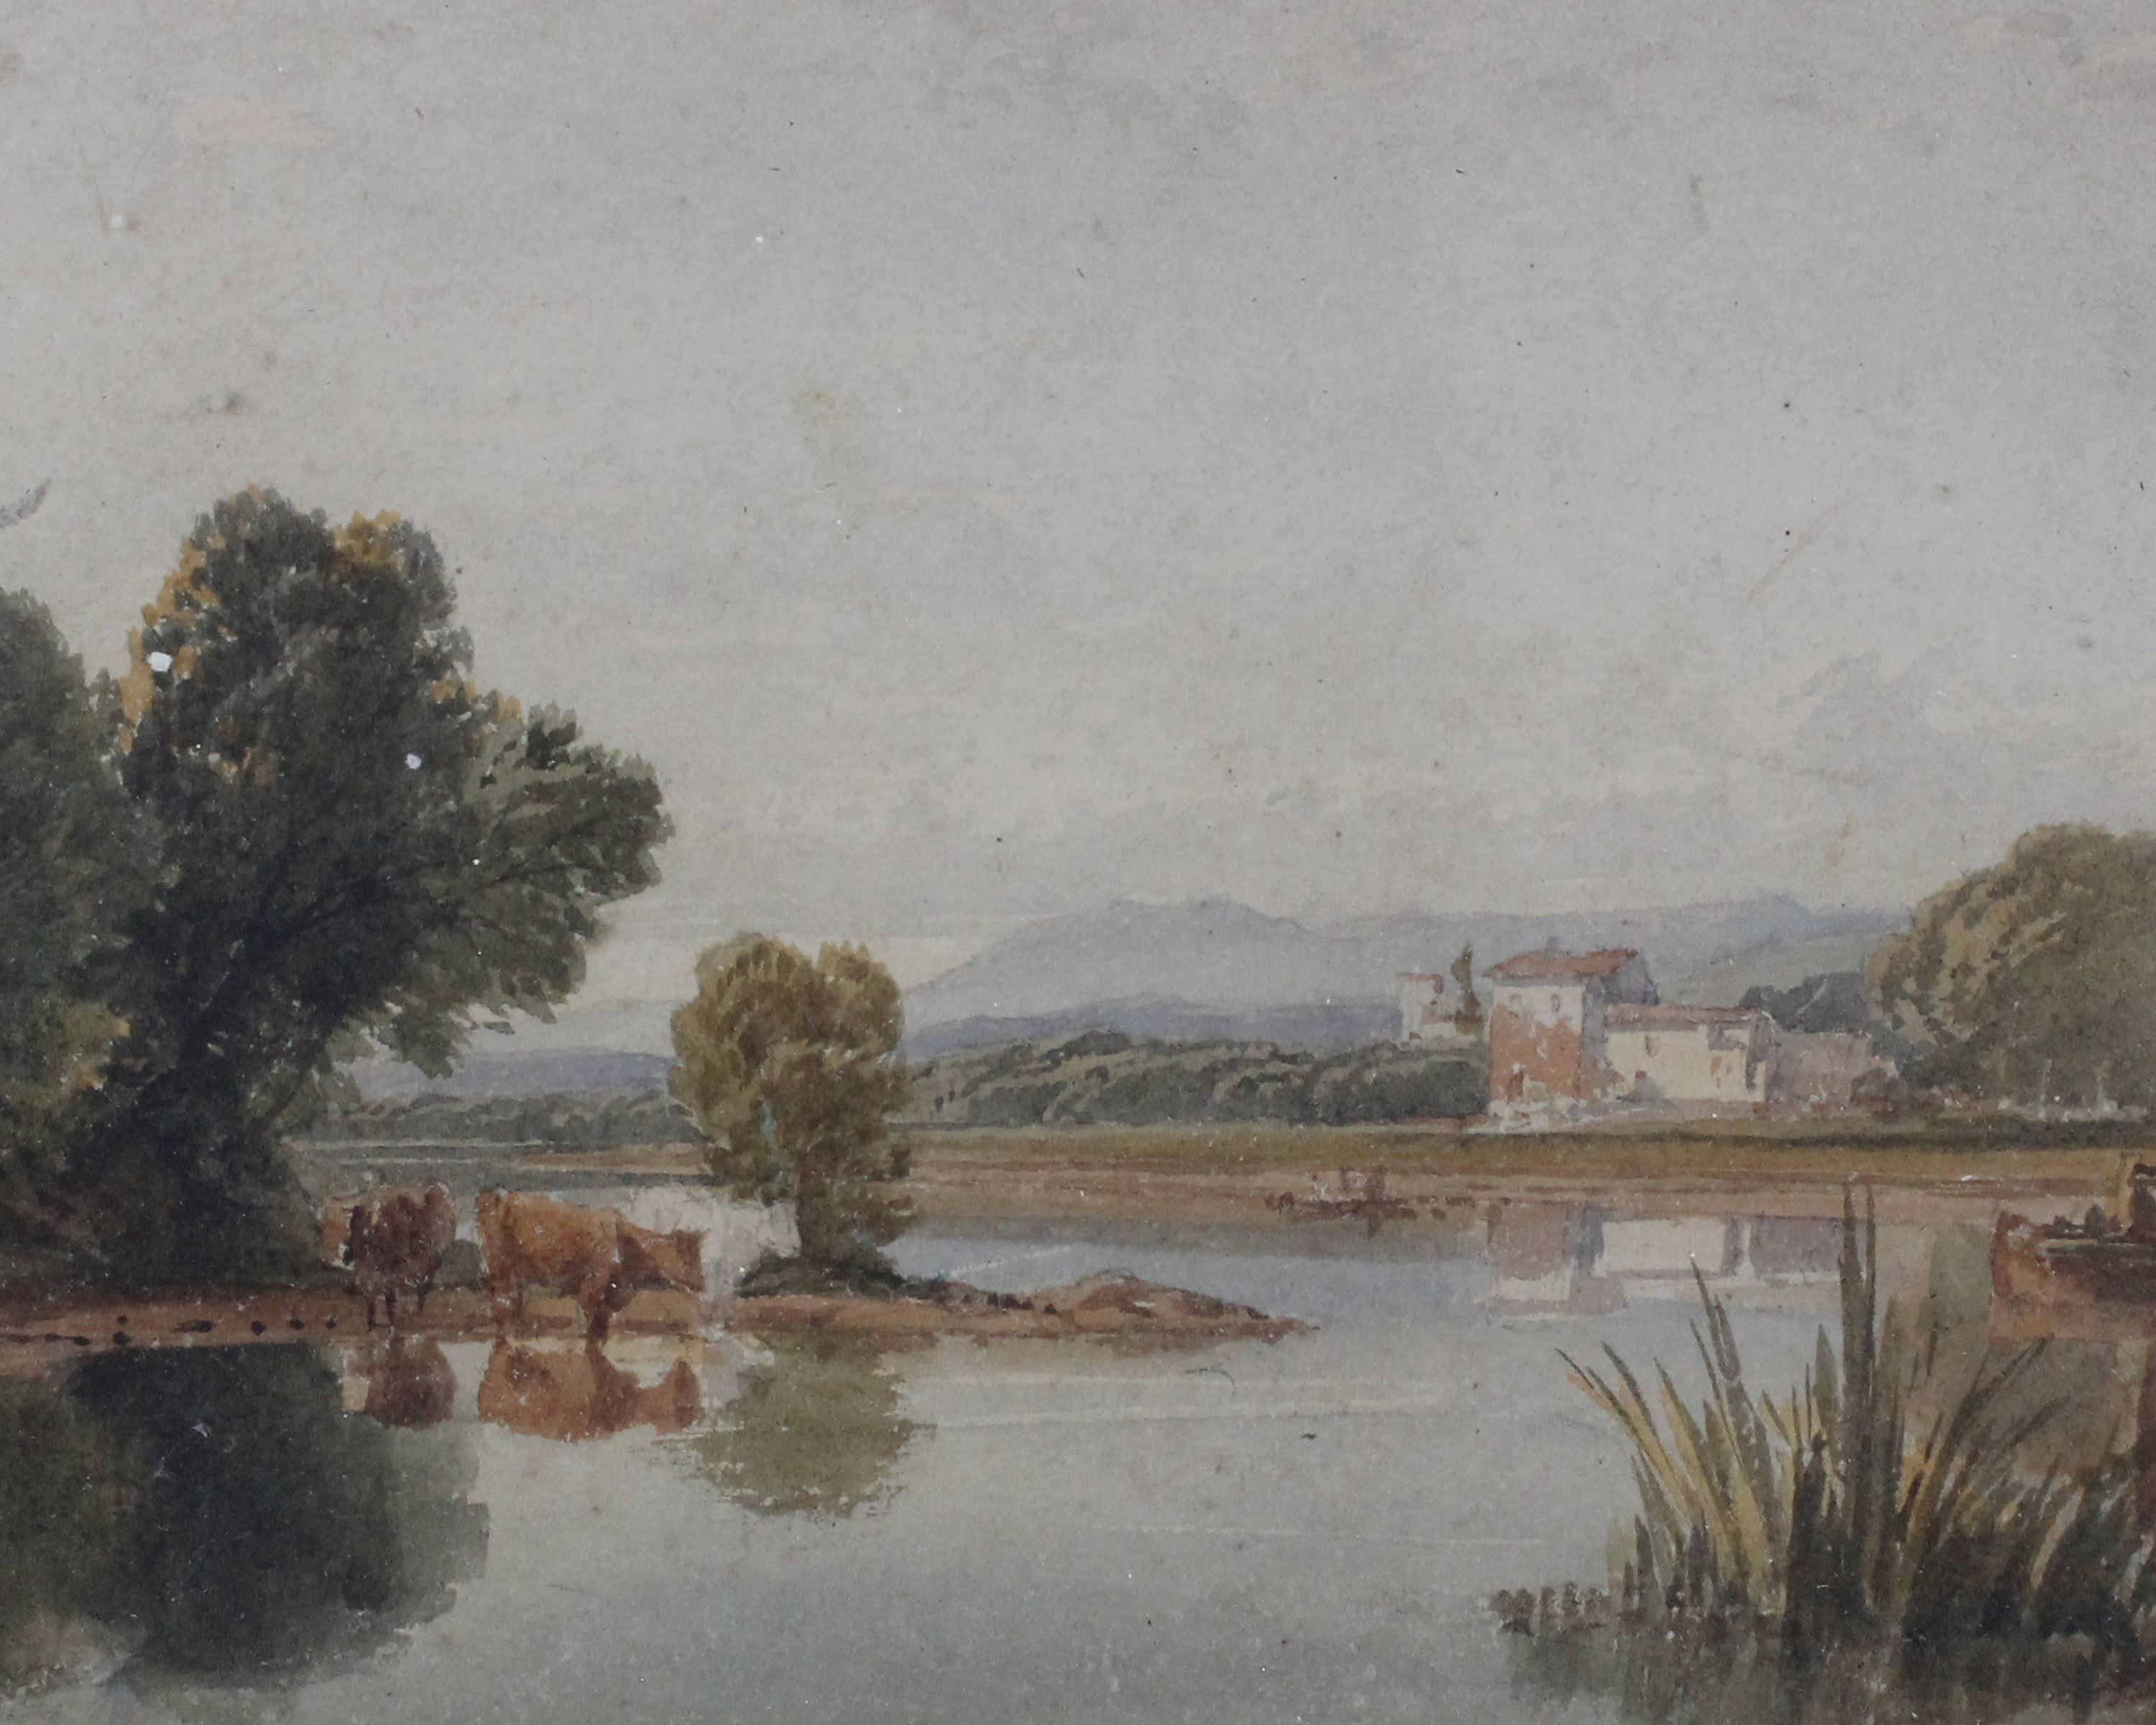 A Watercolour Landscape Painting, Circa 19th Century In gilt effect frame (H)34 x (W)41.5 cm (in